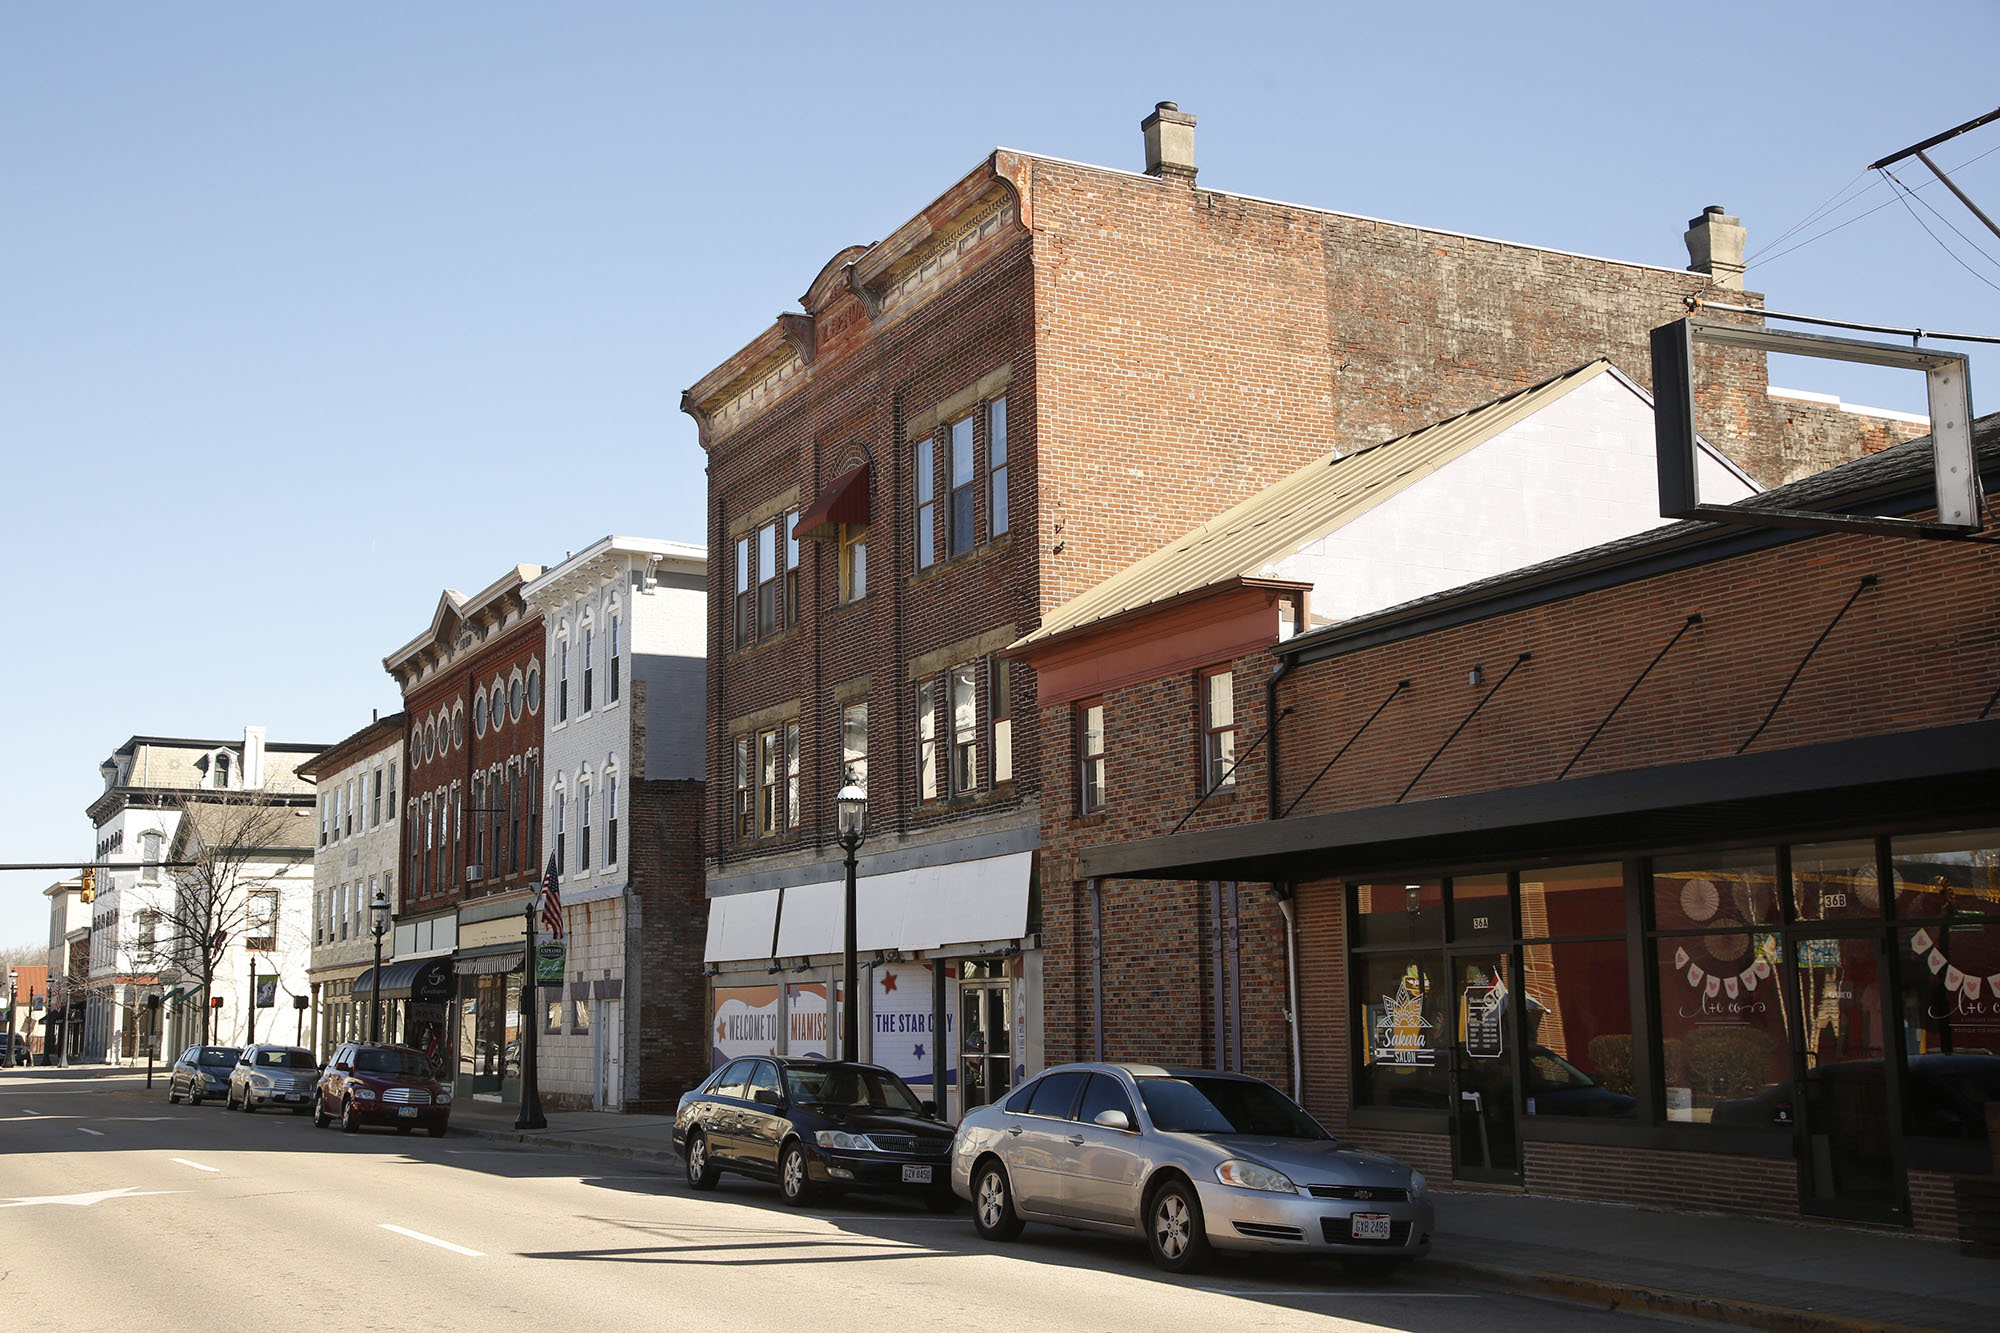 About Downtown Miamisburg  Schools, Demographics, Things to Do